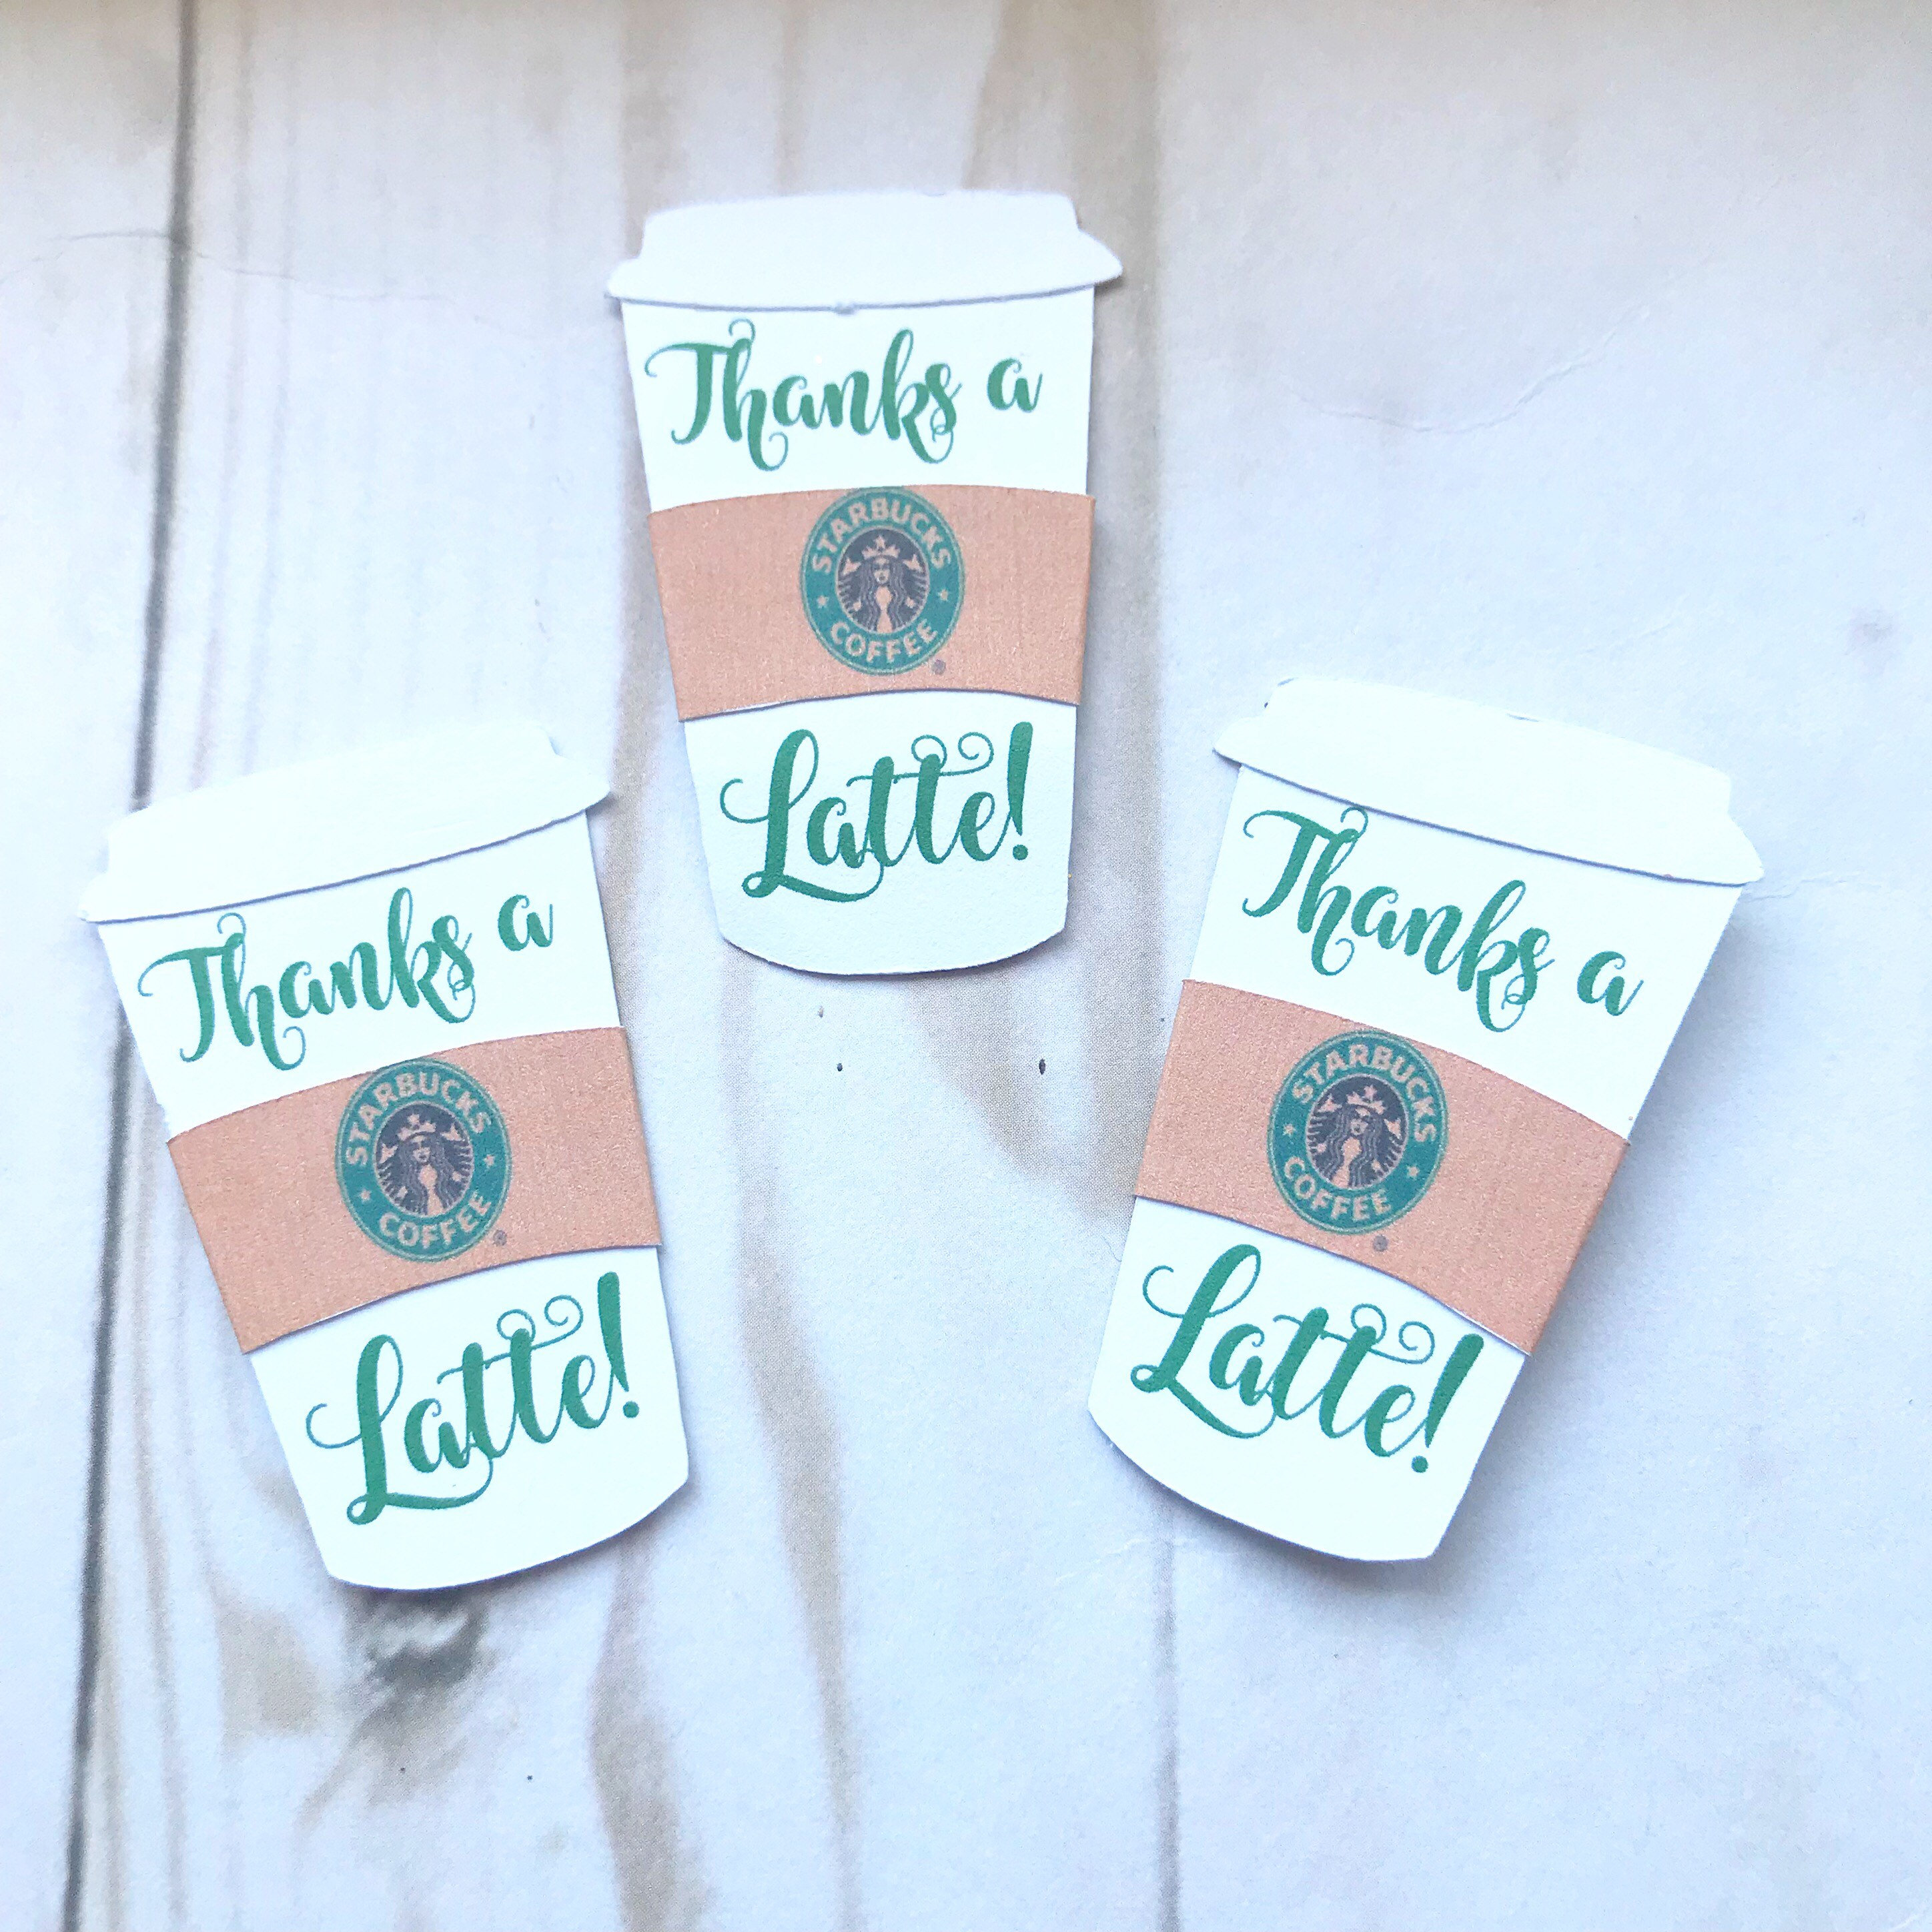 Thanks a latte cards, thanks a latte, thank you cards, coffee cup thank you  cards, mini thank you cards, bulk thank you cards, 25D cards With Thanks A Latte Card Template